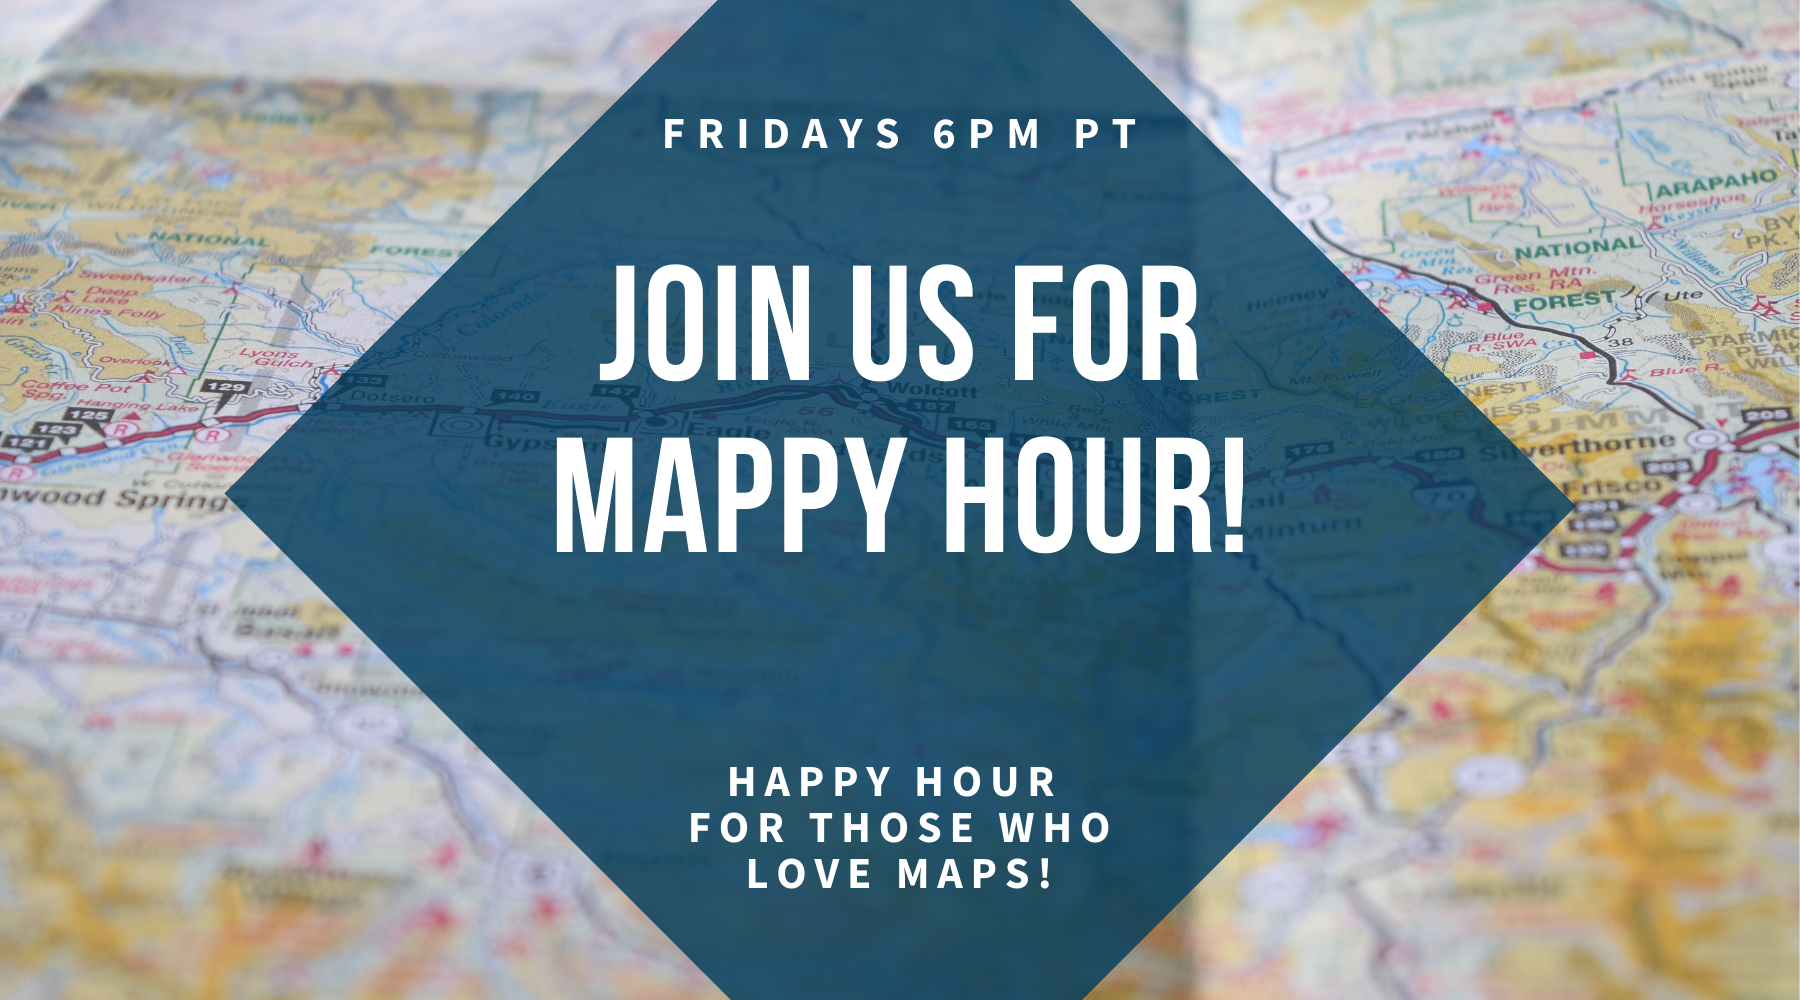 Join Us For Mappy Hour